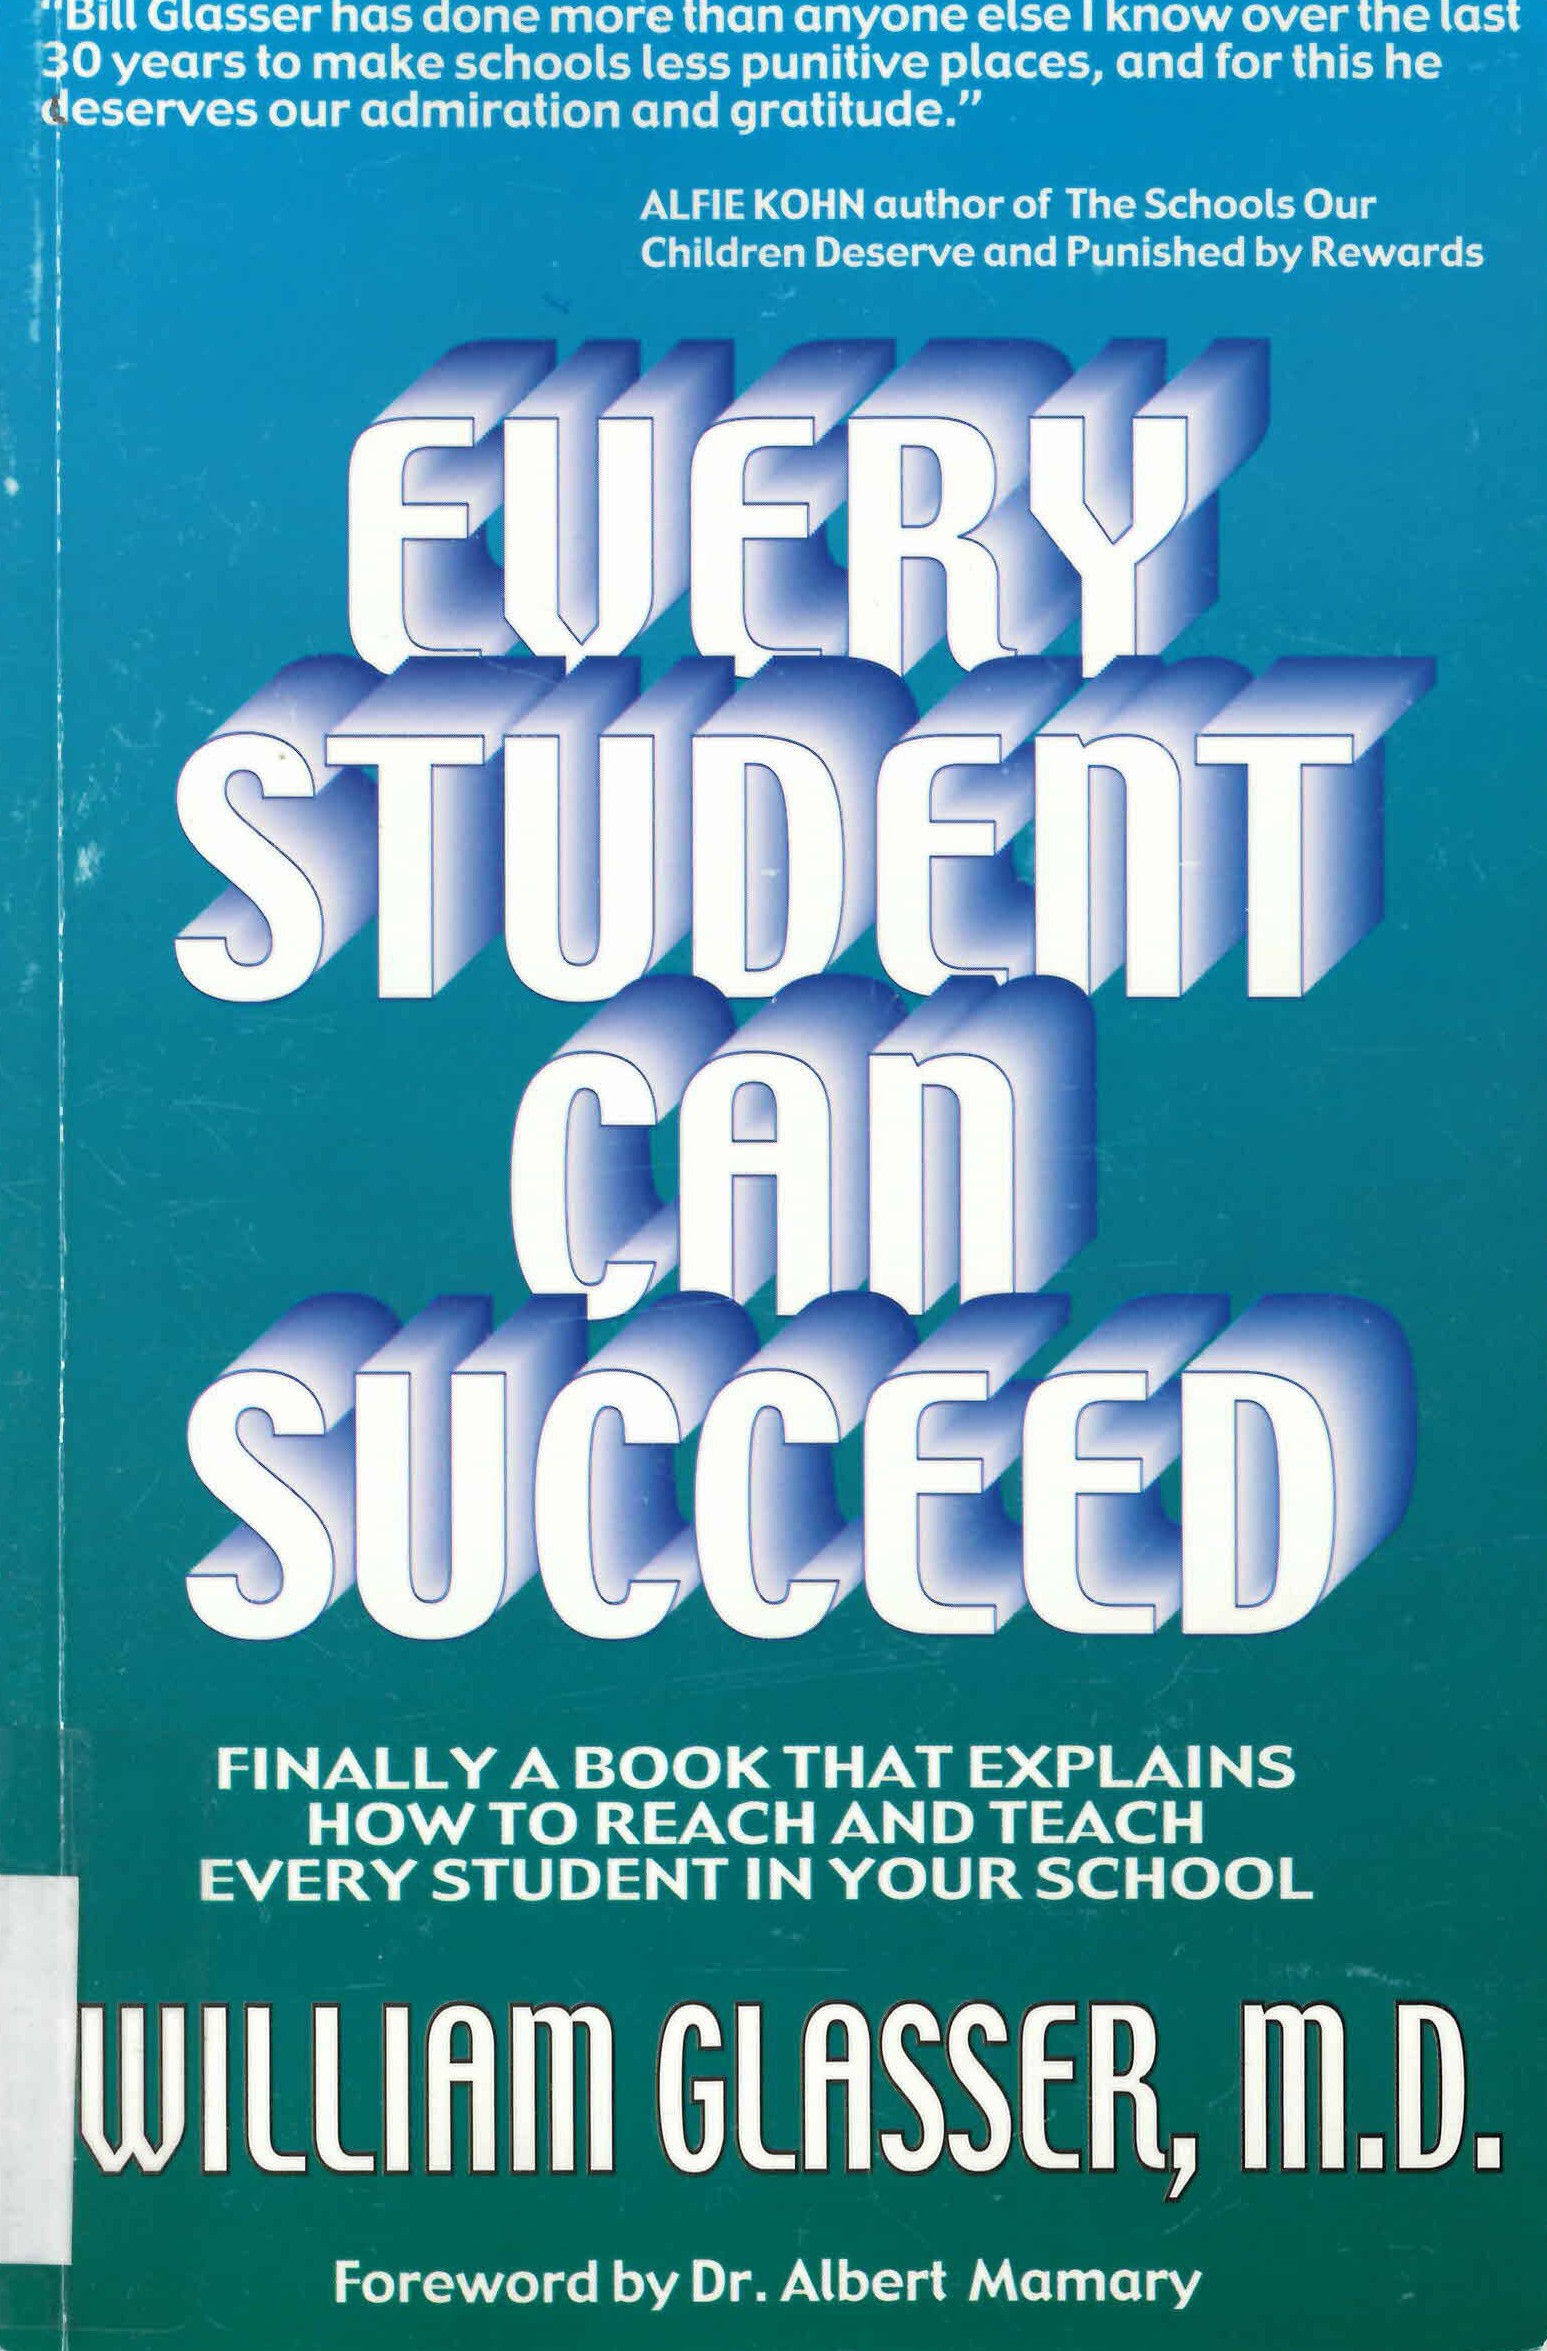 Every student can succeed